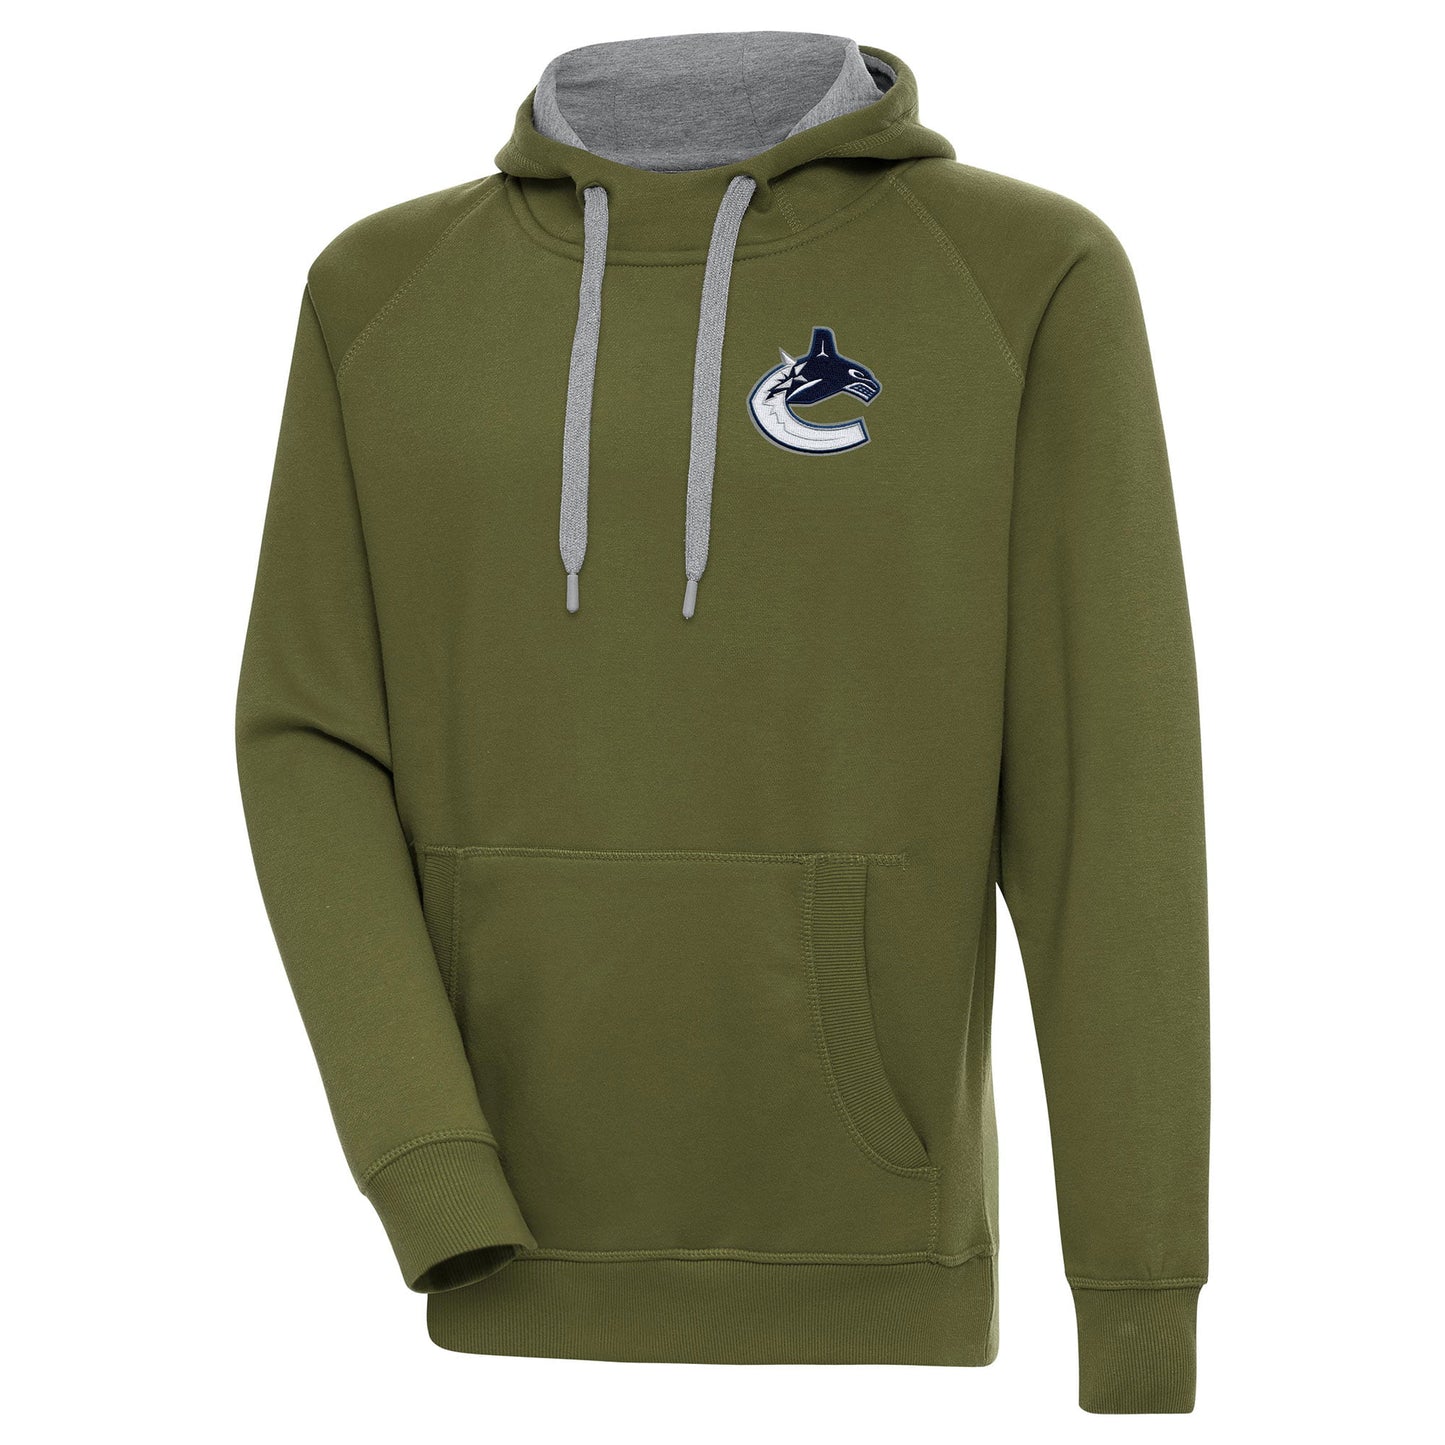 Men's Antigua Olive Vancouver Canucks Victory Pullover Hoodie